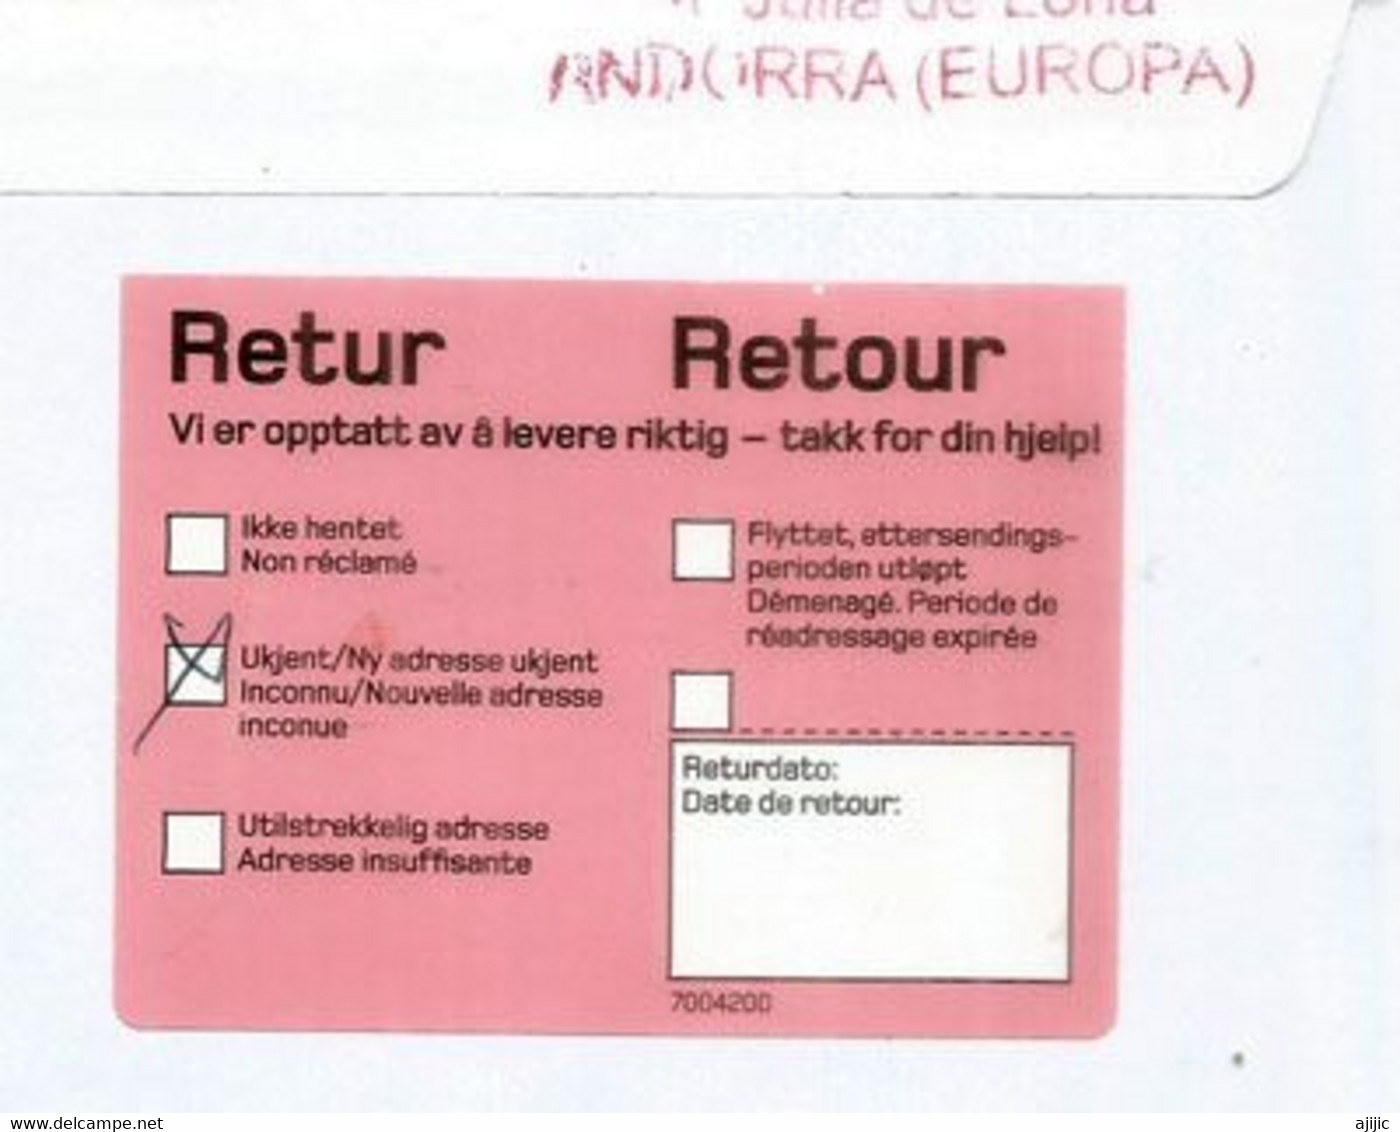 Letter From Andorra Sent To Norway 2022 ,  Return To Andorra.  2 Pic. - Briefe U. Dokumente